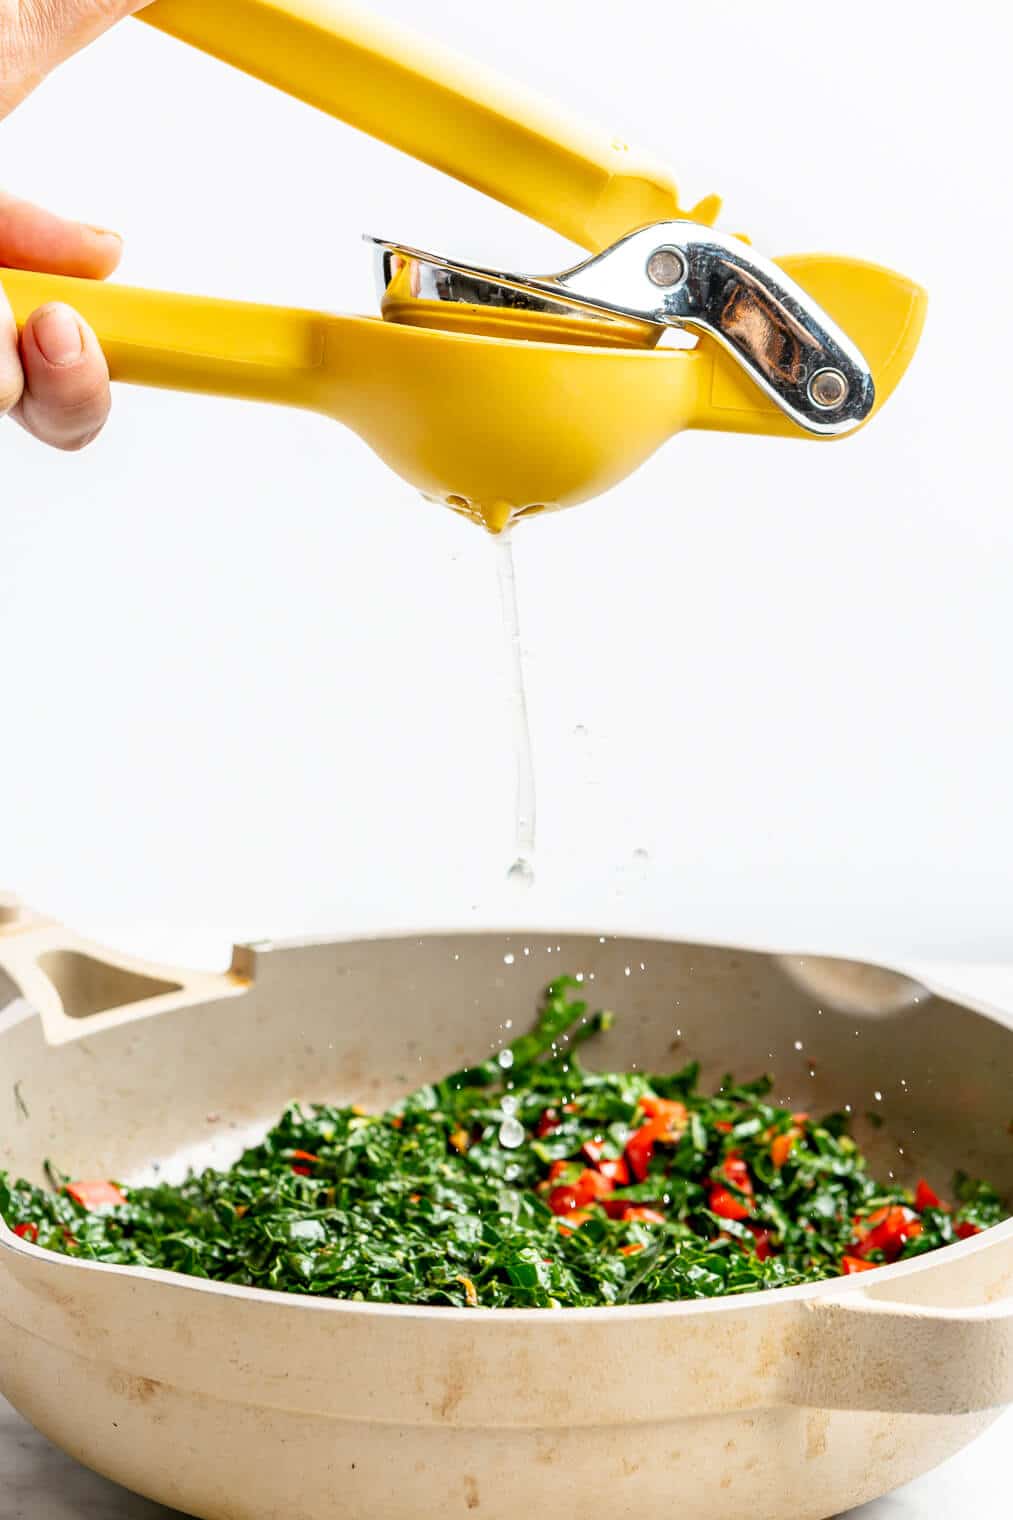 Hand squeezing a citrus juicer over top of kale and veggies in a saute pan.